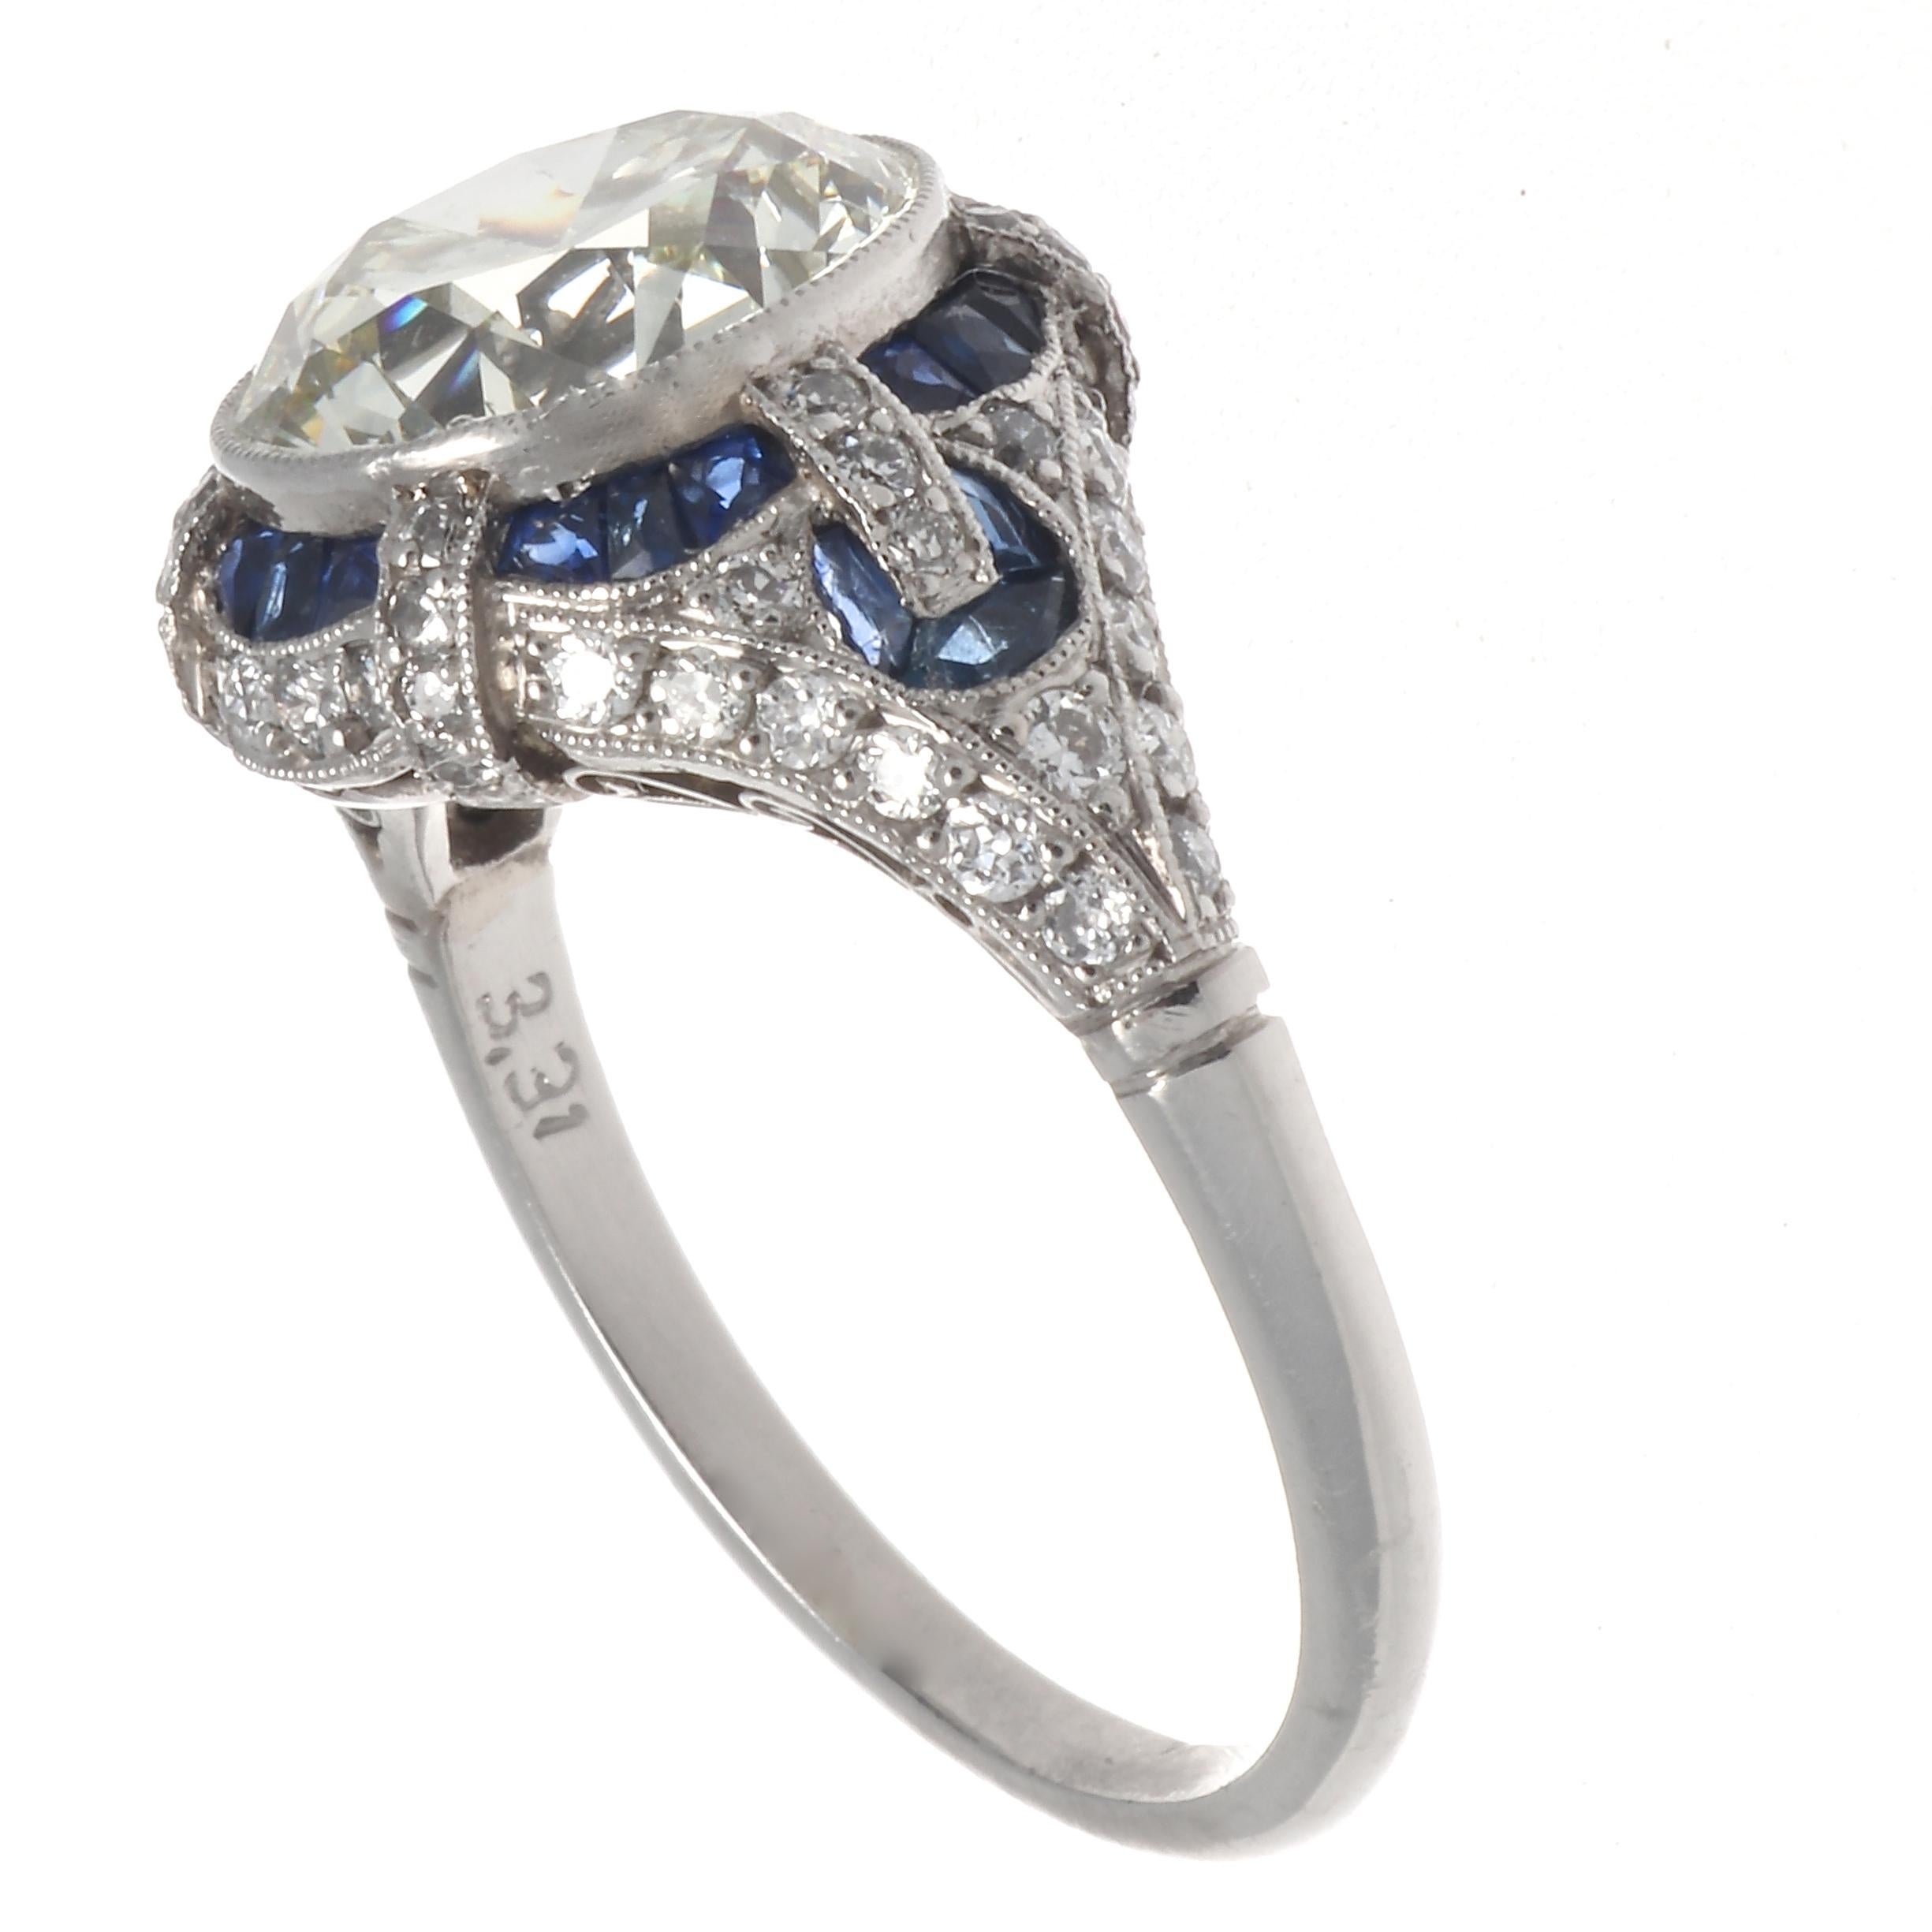 A colorful and substantial engagement ring, inspired  from the Art Deco era. Reflecting the elements of that time in symmetry, elegance, grace and beauty.  Featuring a 3.31 carat old European cut diamond, graded as K,L color, VVS clarity. With 24